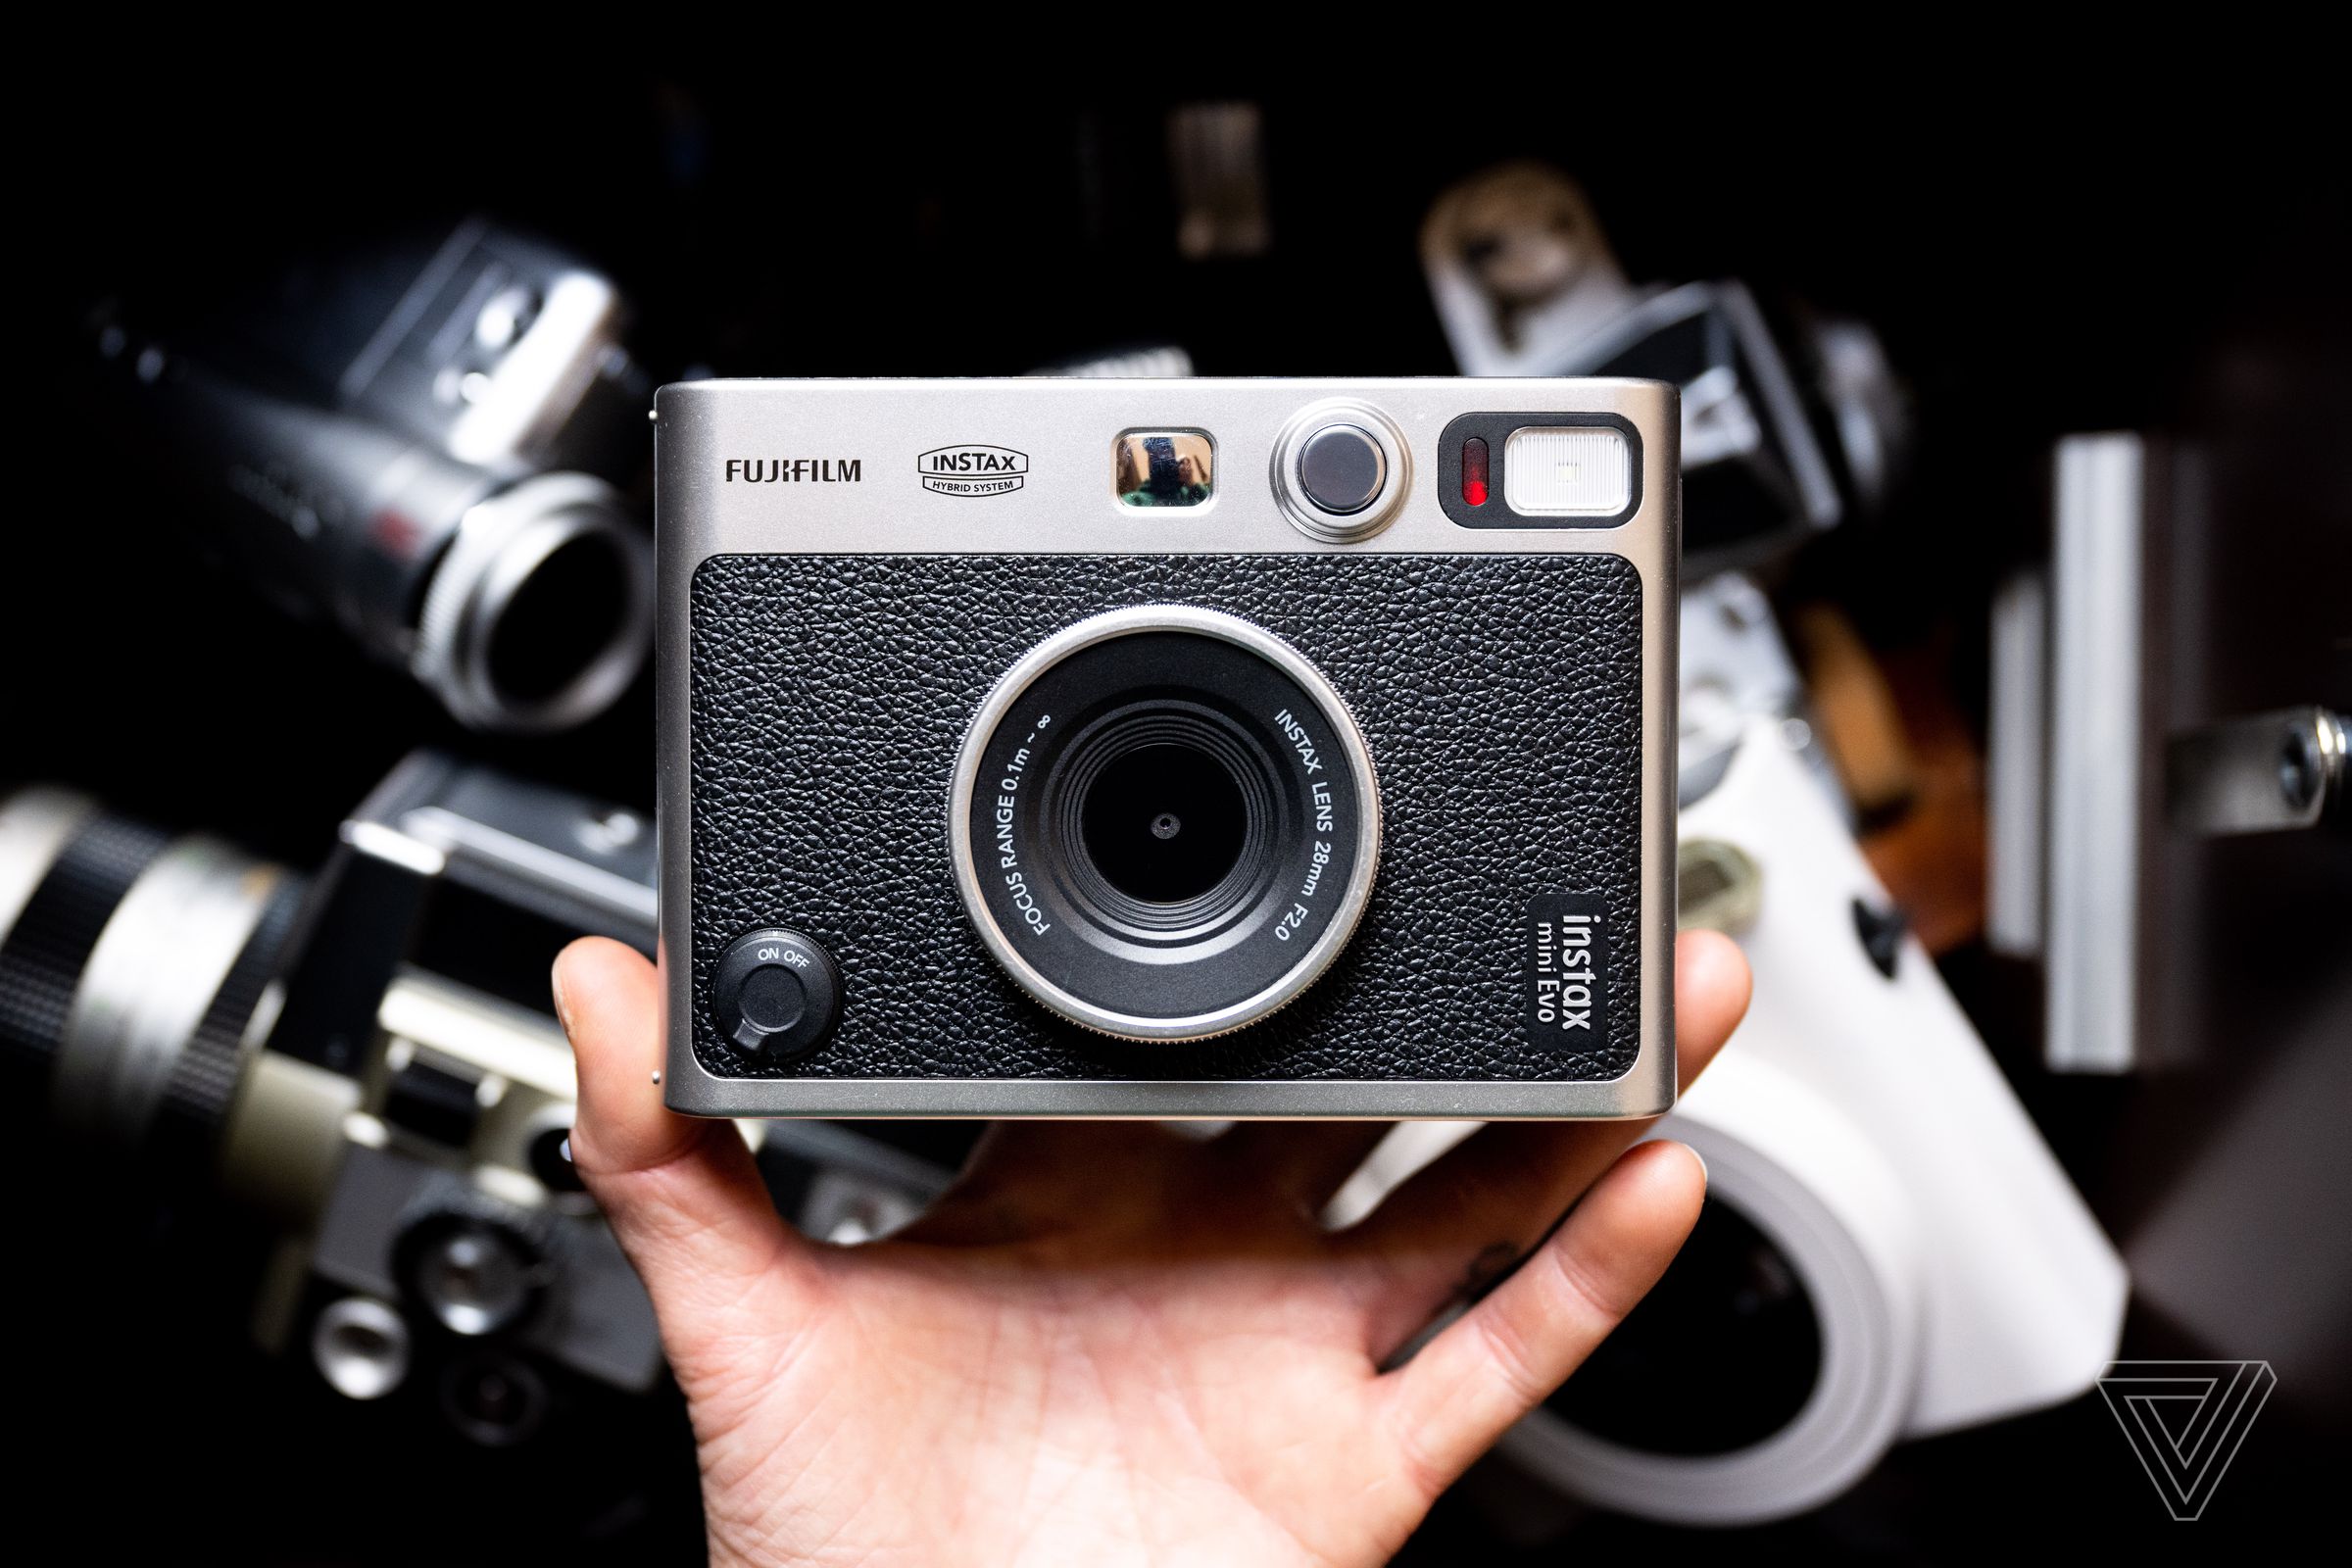 If money was no object, the stylish Instax Mini Evo would be the best instant camera to buy.